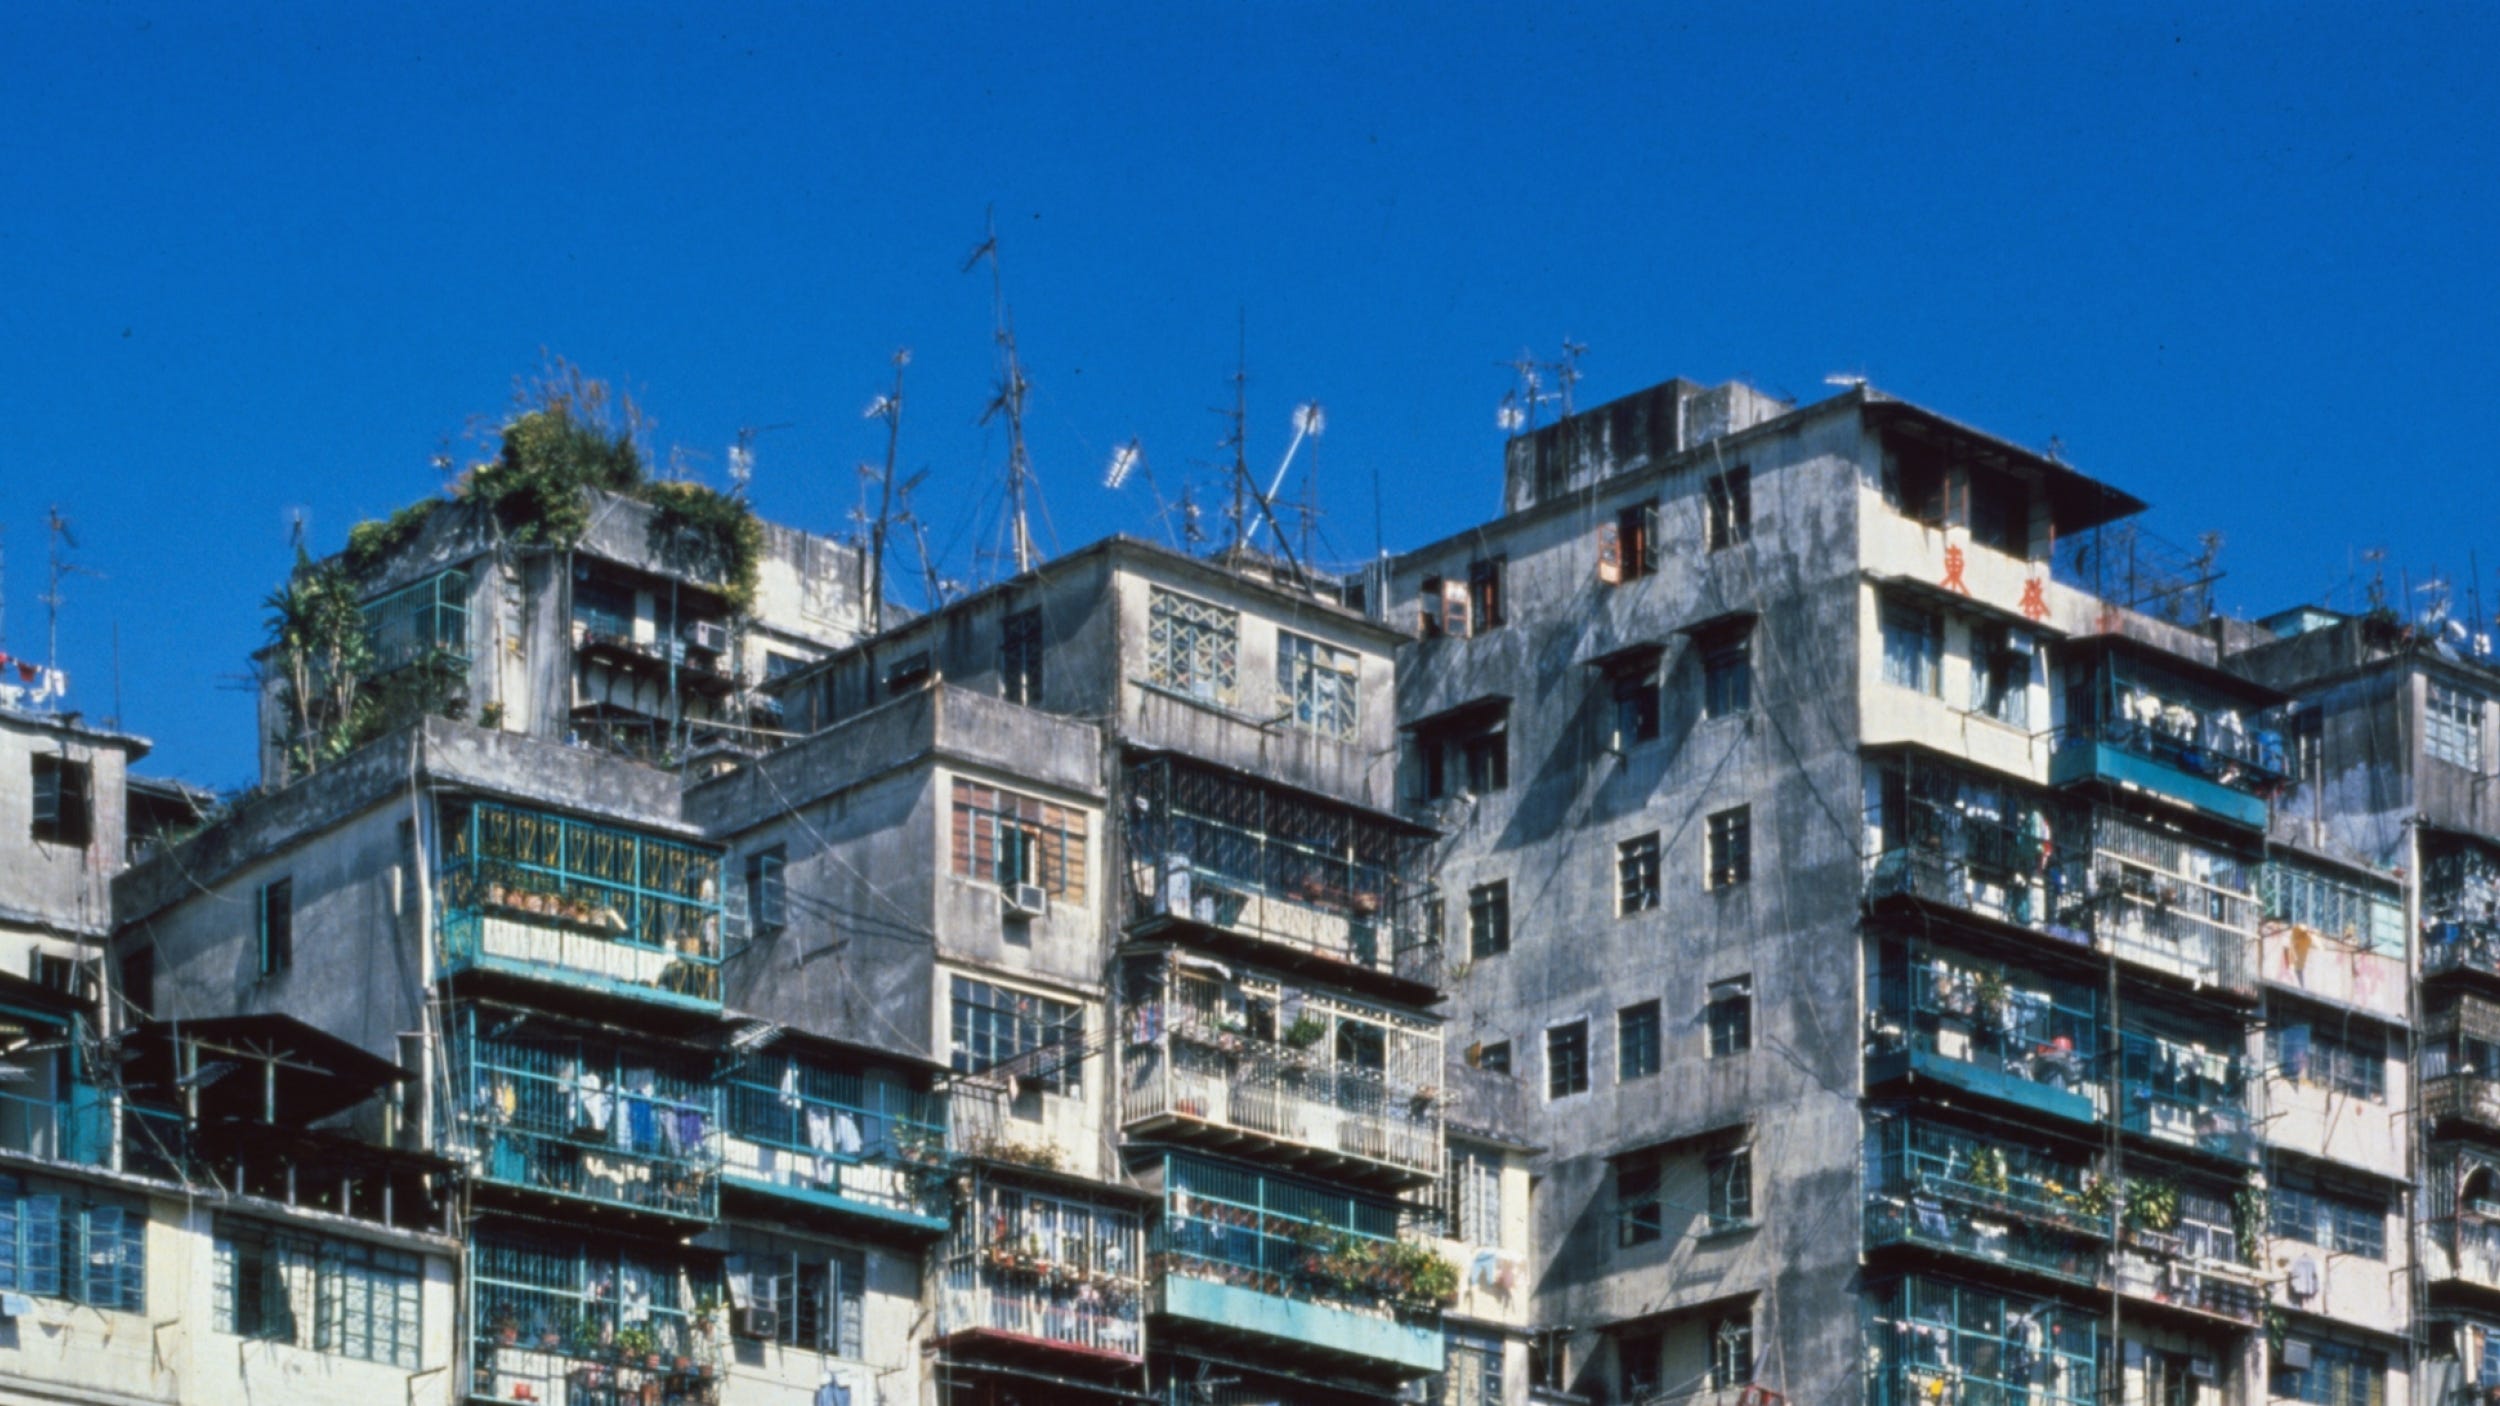 Image of Kowloon Walled City, filthy human hive